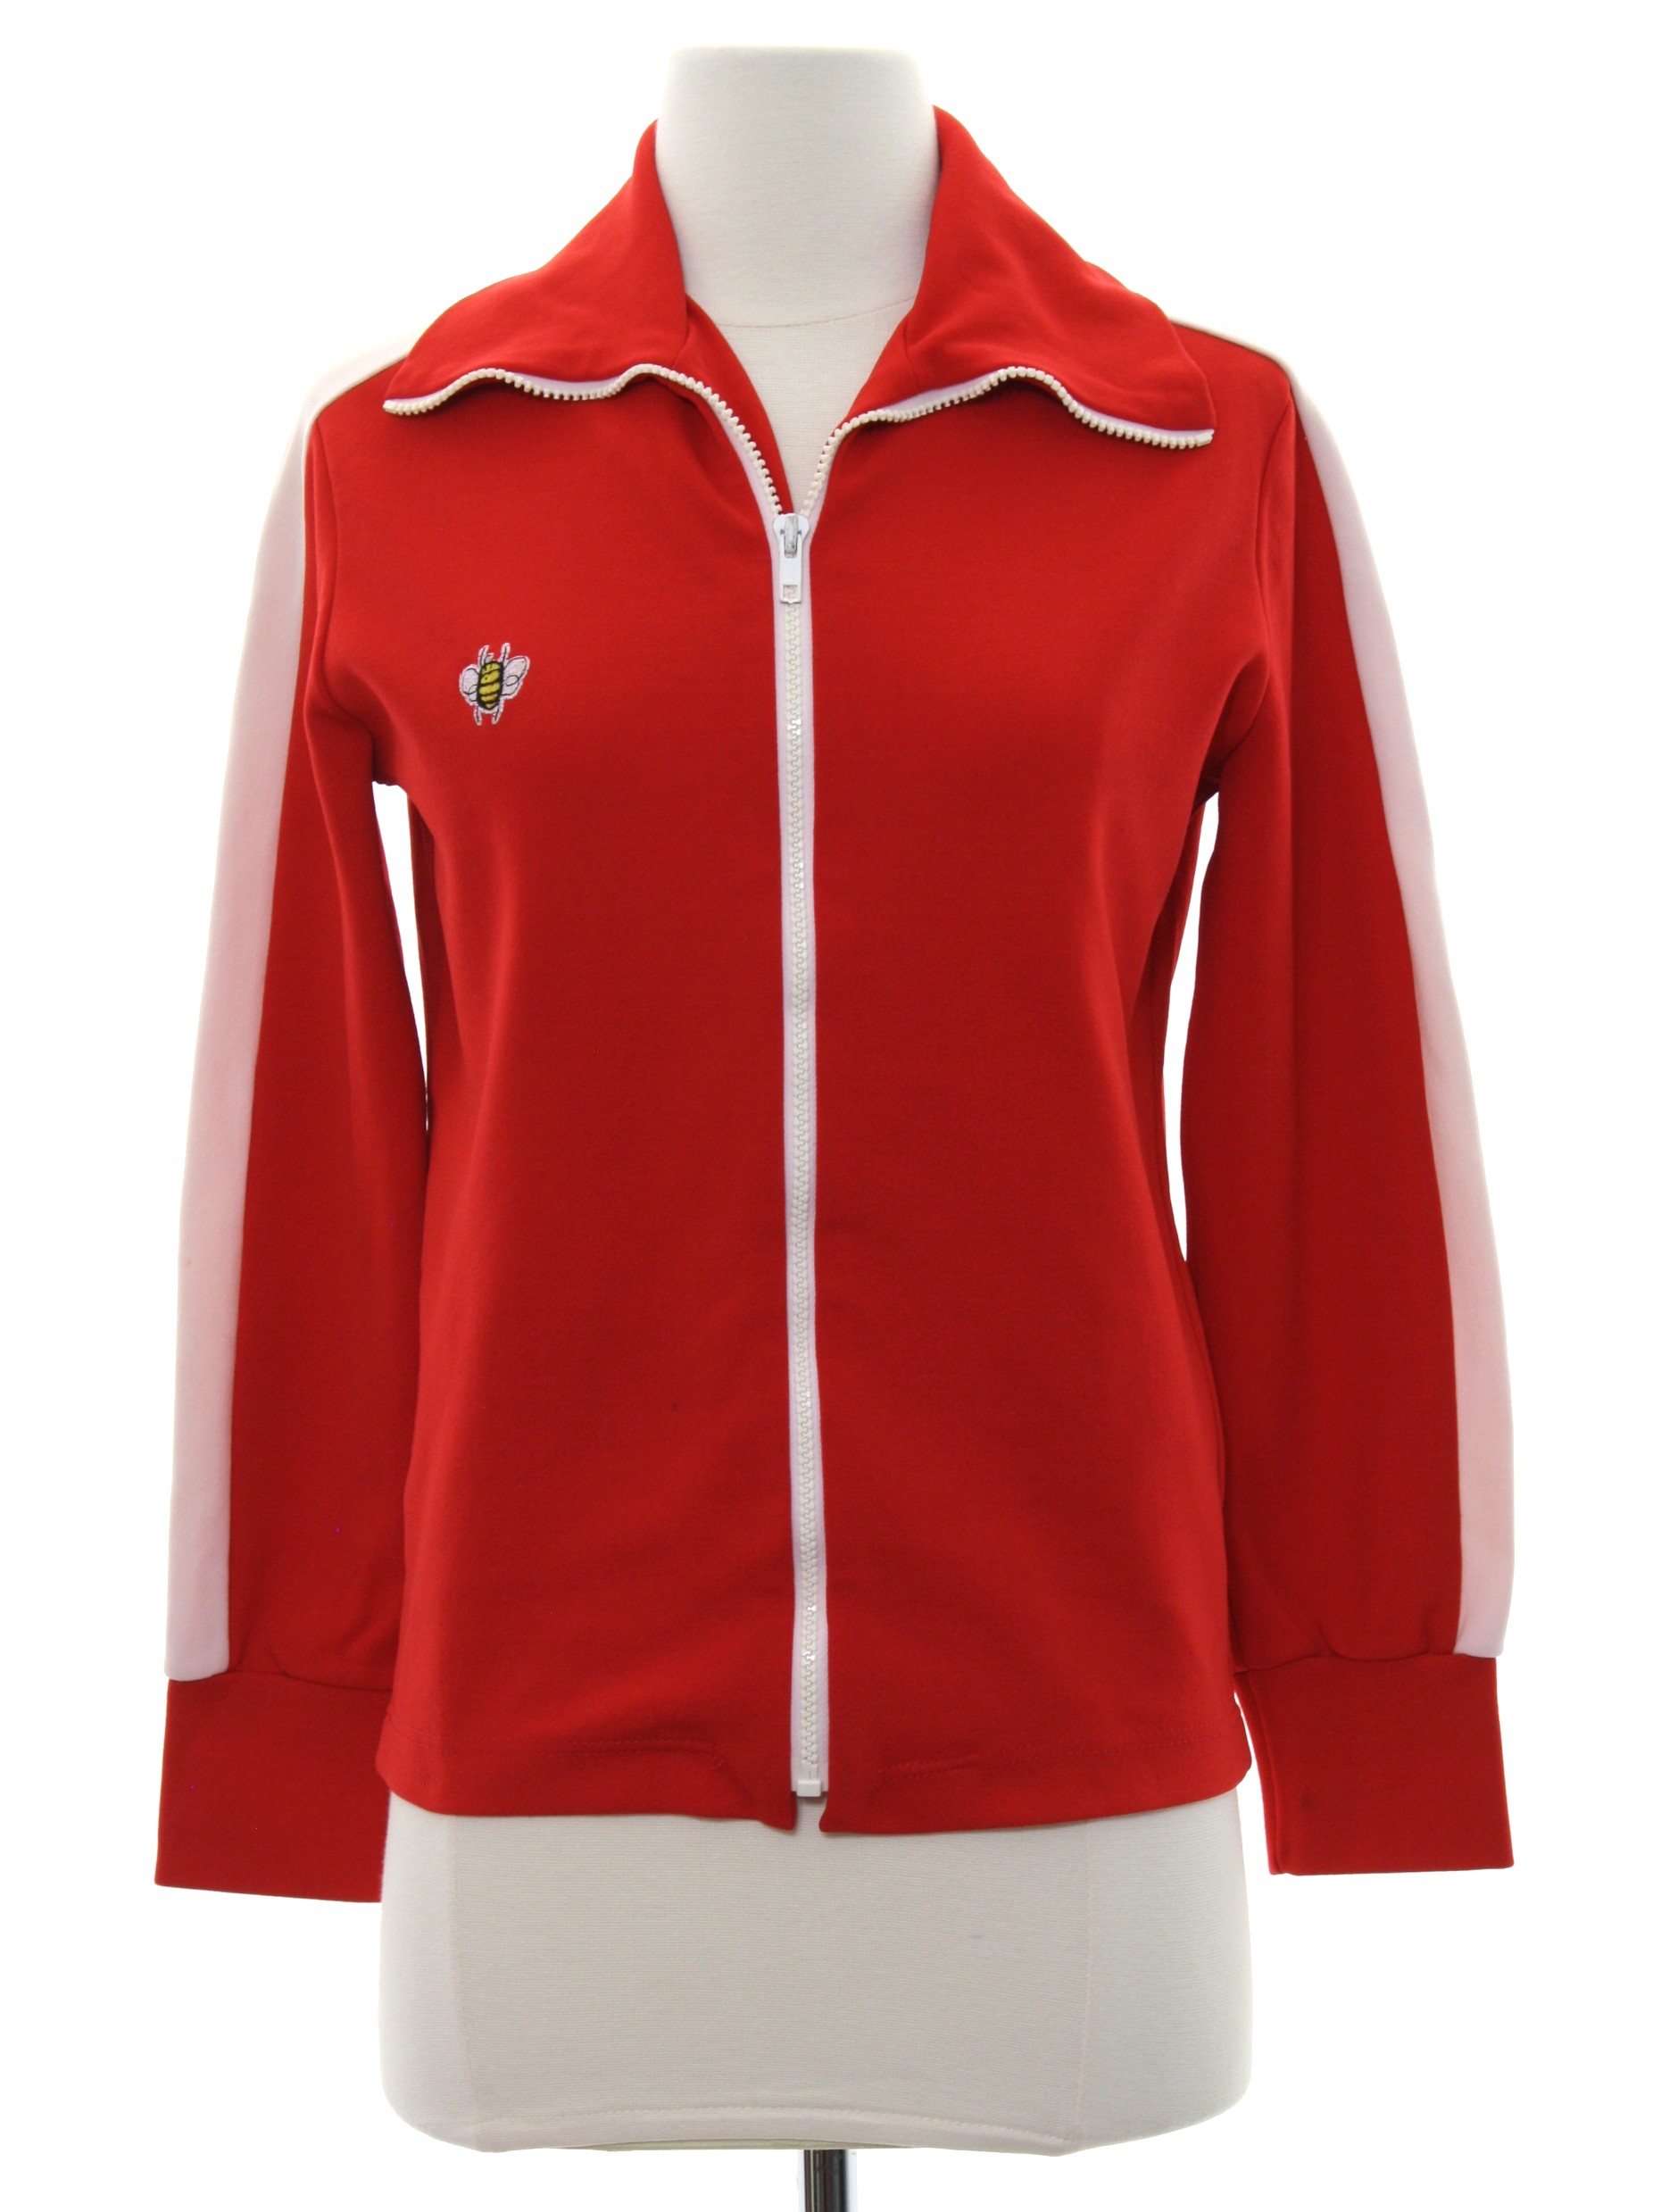 No Label 70\'s Vintage Jacket: 70s -No Label- Womens red and white nylon  longsleeve zip front track or jogging jacket. Stripes down the sleeves, an  embroidered bee design on the right chest